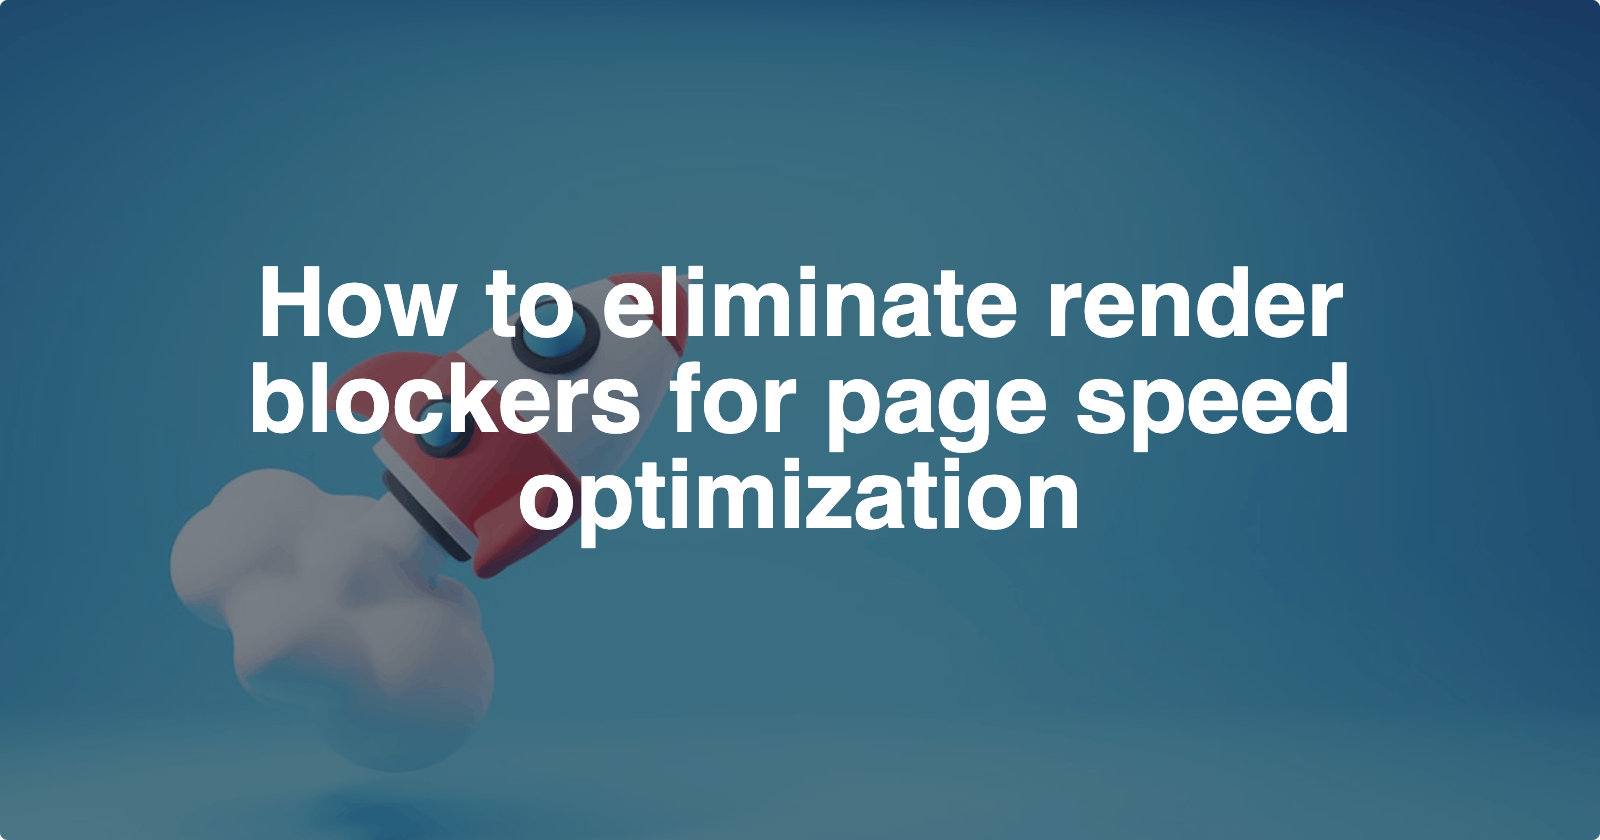 How to eliminate render blockers for page speed optimization